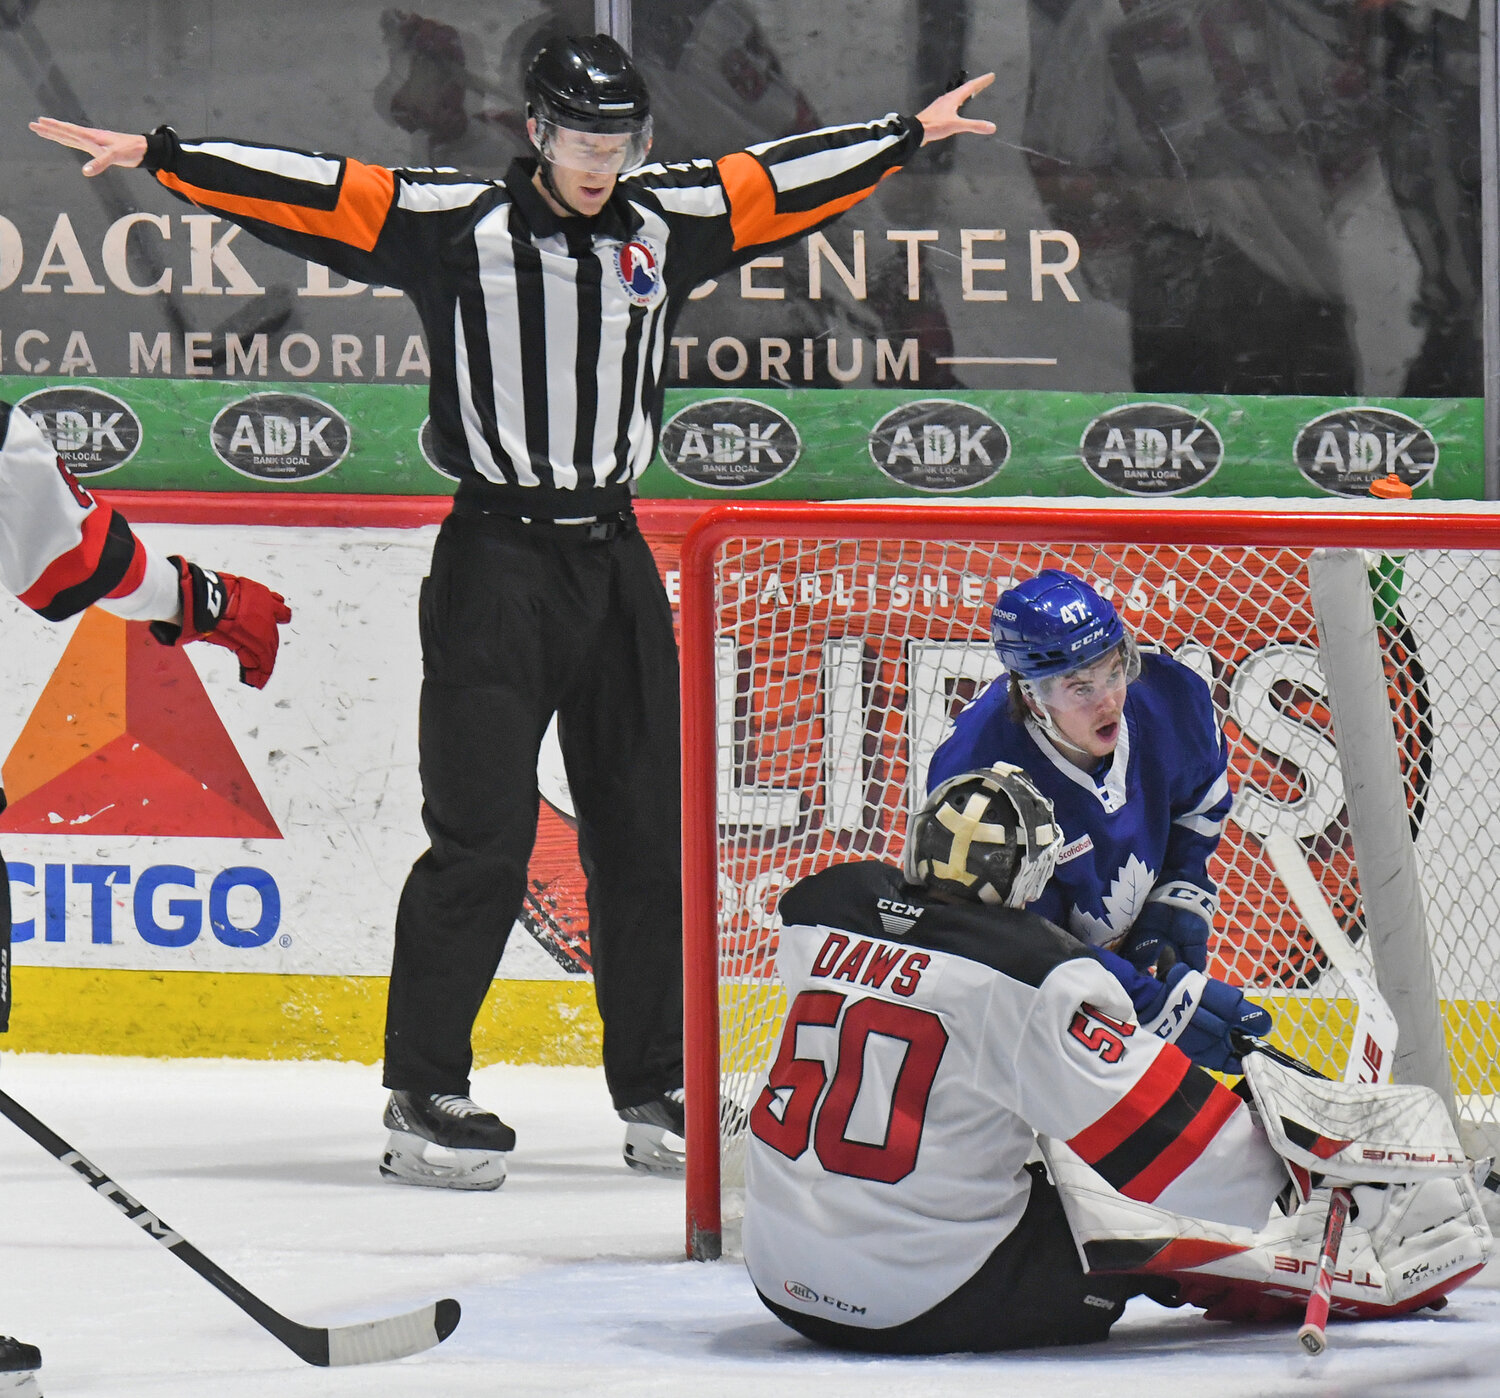 A referee waves off a goal by the Toronto Marlies in the middle of the first period of Wednesday's North Division semifinal Game 3 in Utica. Goalie Nico Daws sits in the crease with Toronto's Topi Niemela in the goal. The Marlies won 5-2 so Utica must now win Games 4 and 5 or be eliminated from the postseason.